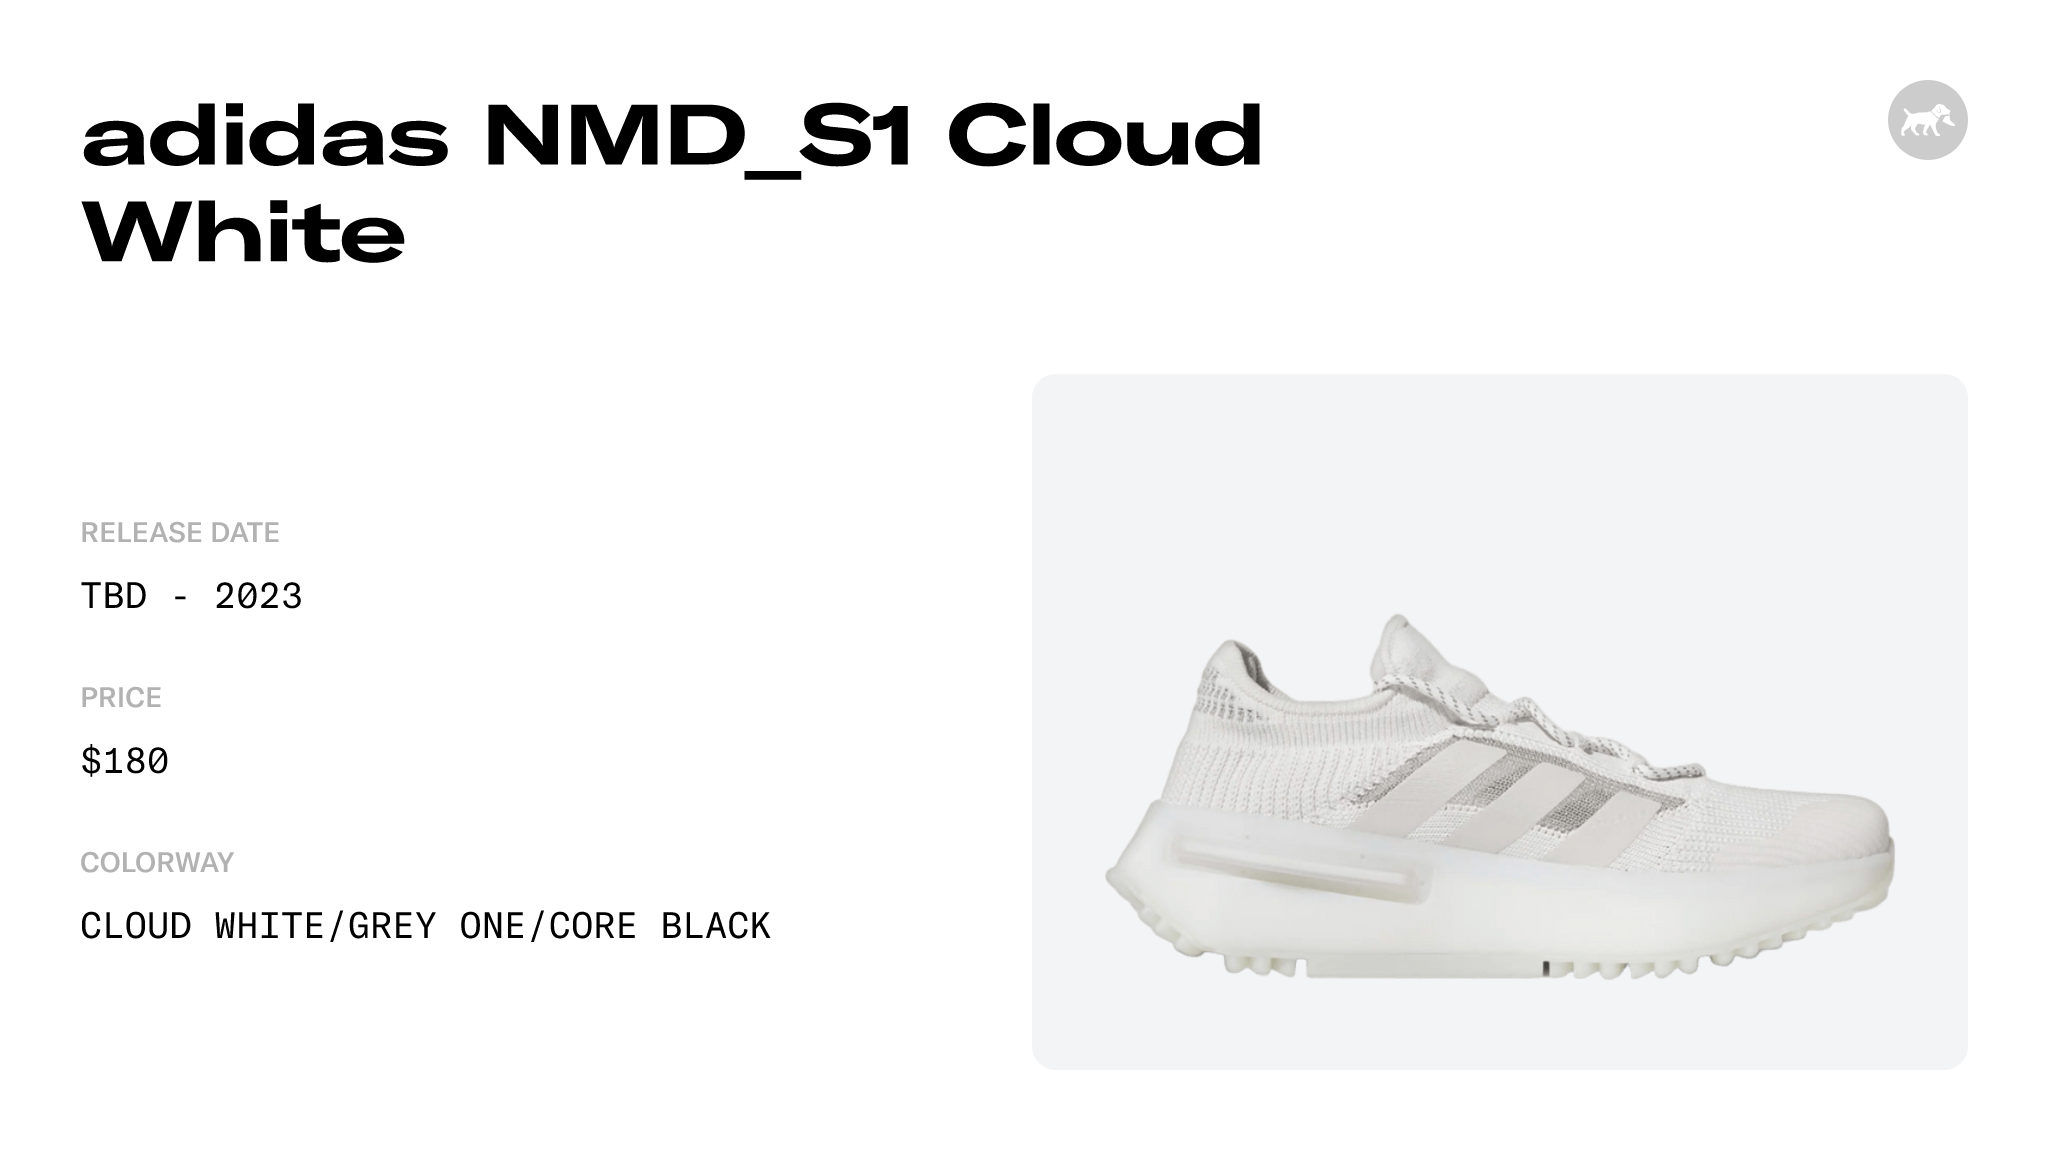 adidas NMD_S1 Cloud White - GW4652 Raffles and Release Date